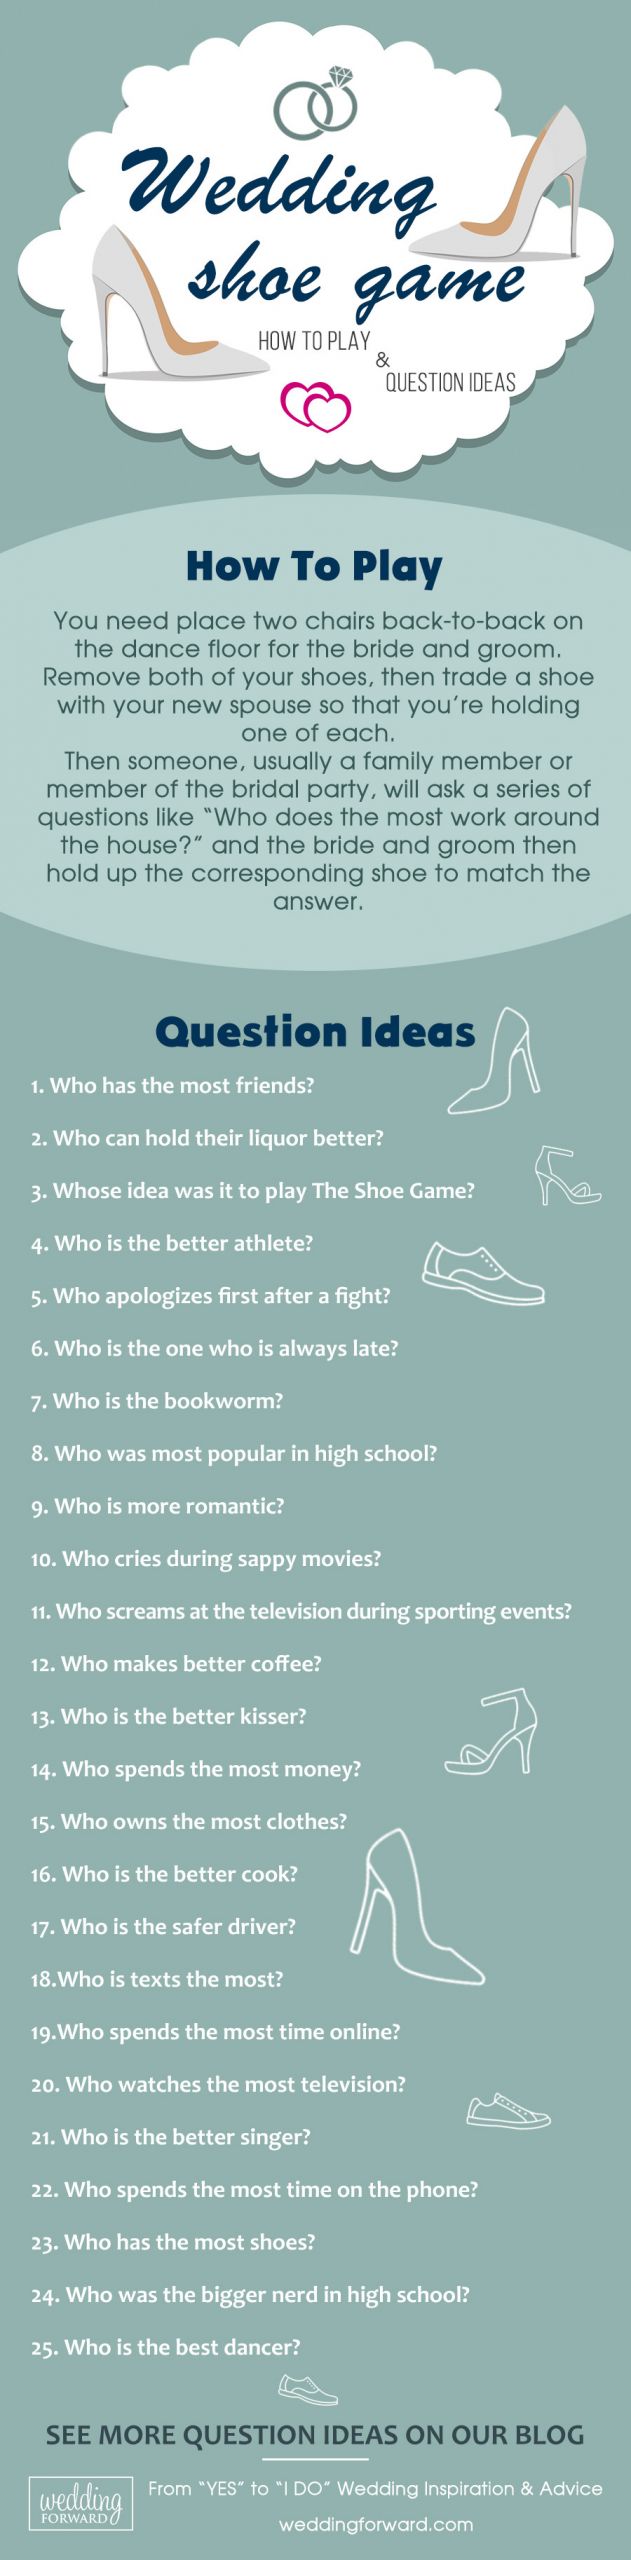 Wedding Reception Shoe Game
 The Shoe Game – How To Play and Question Ideas